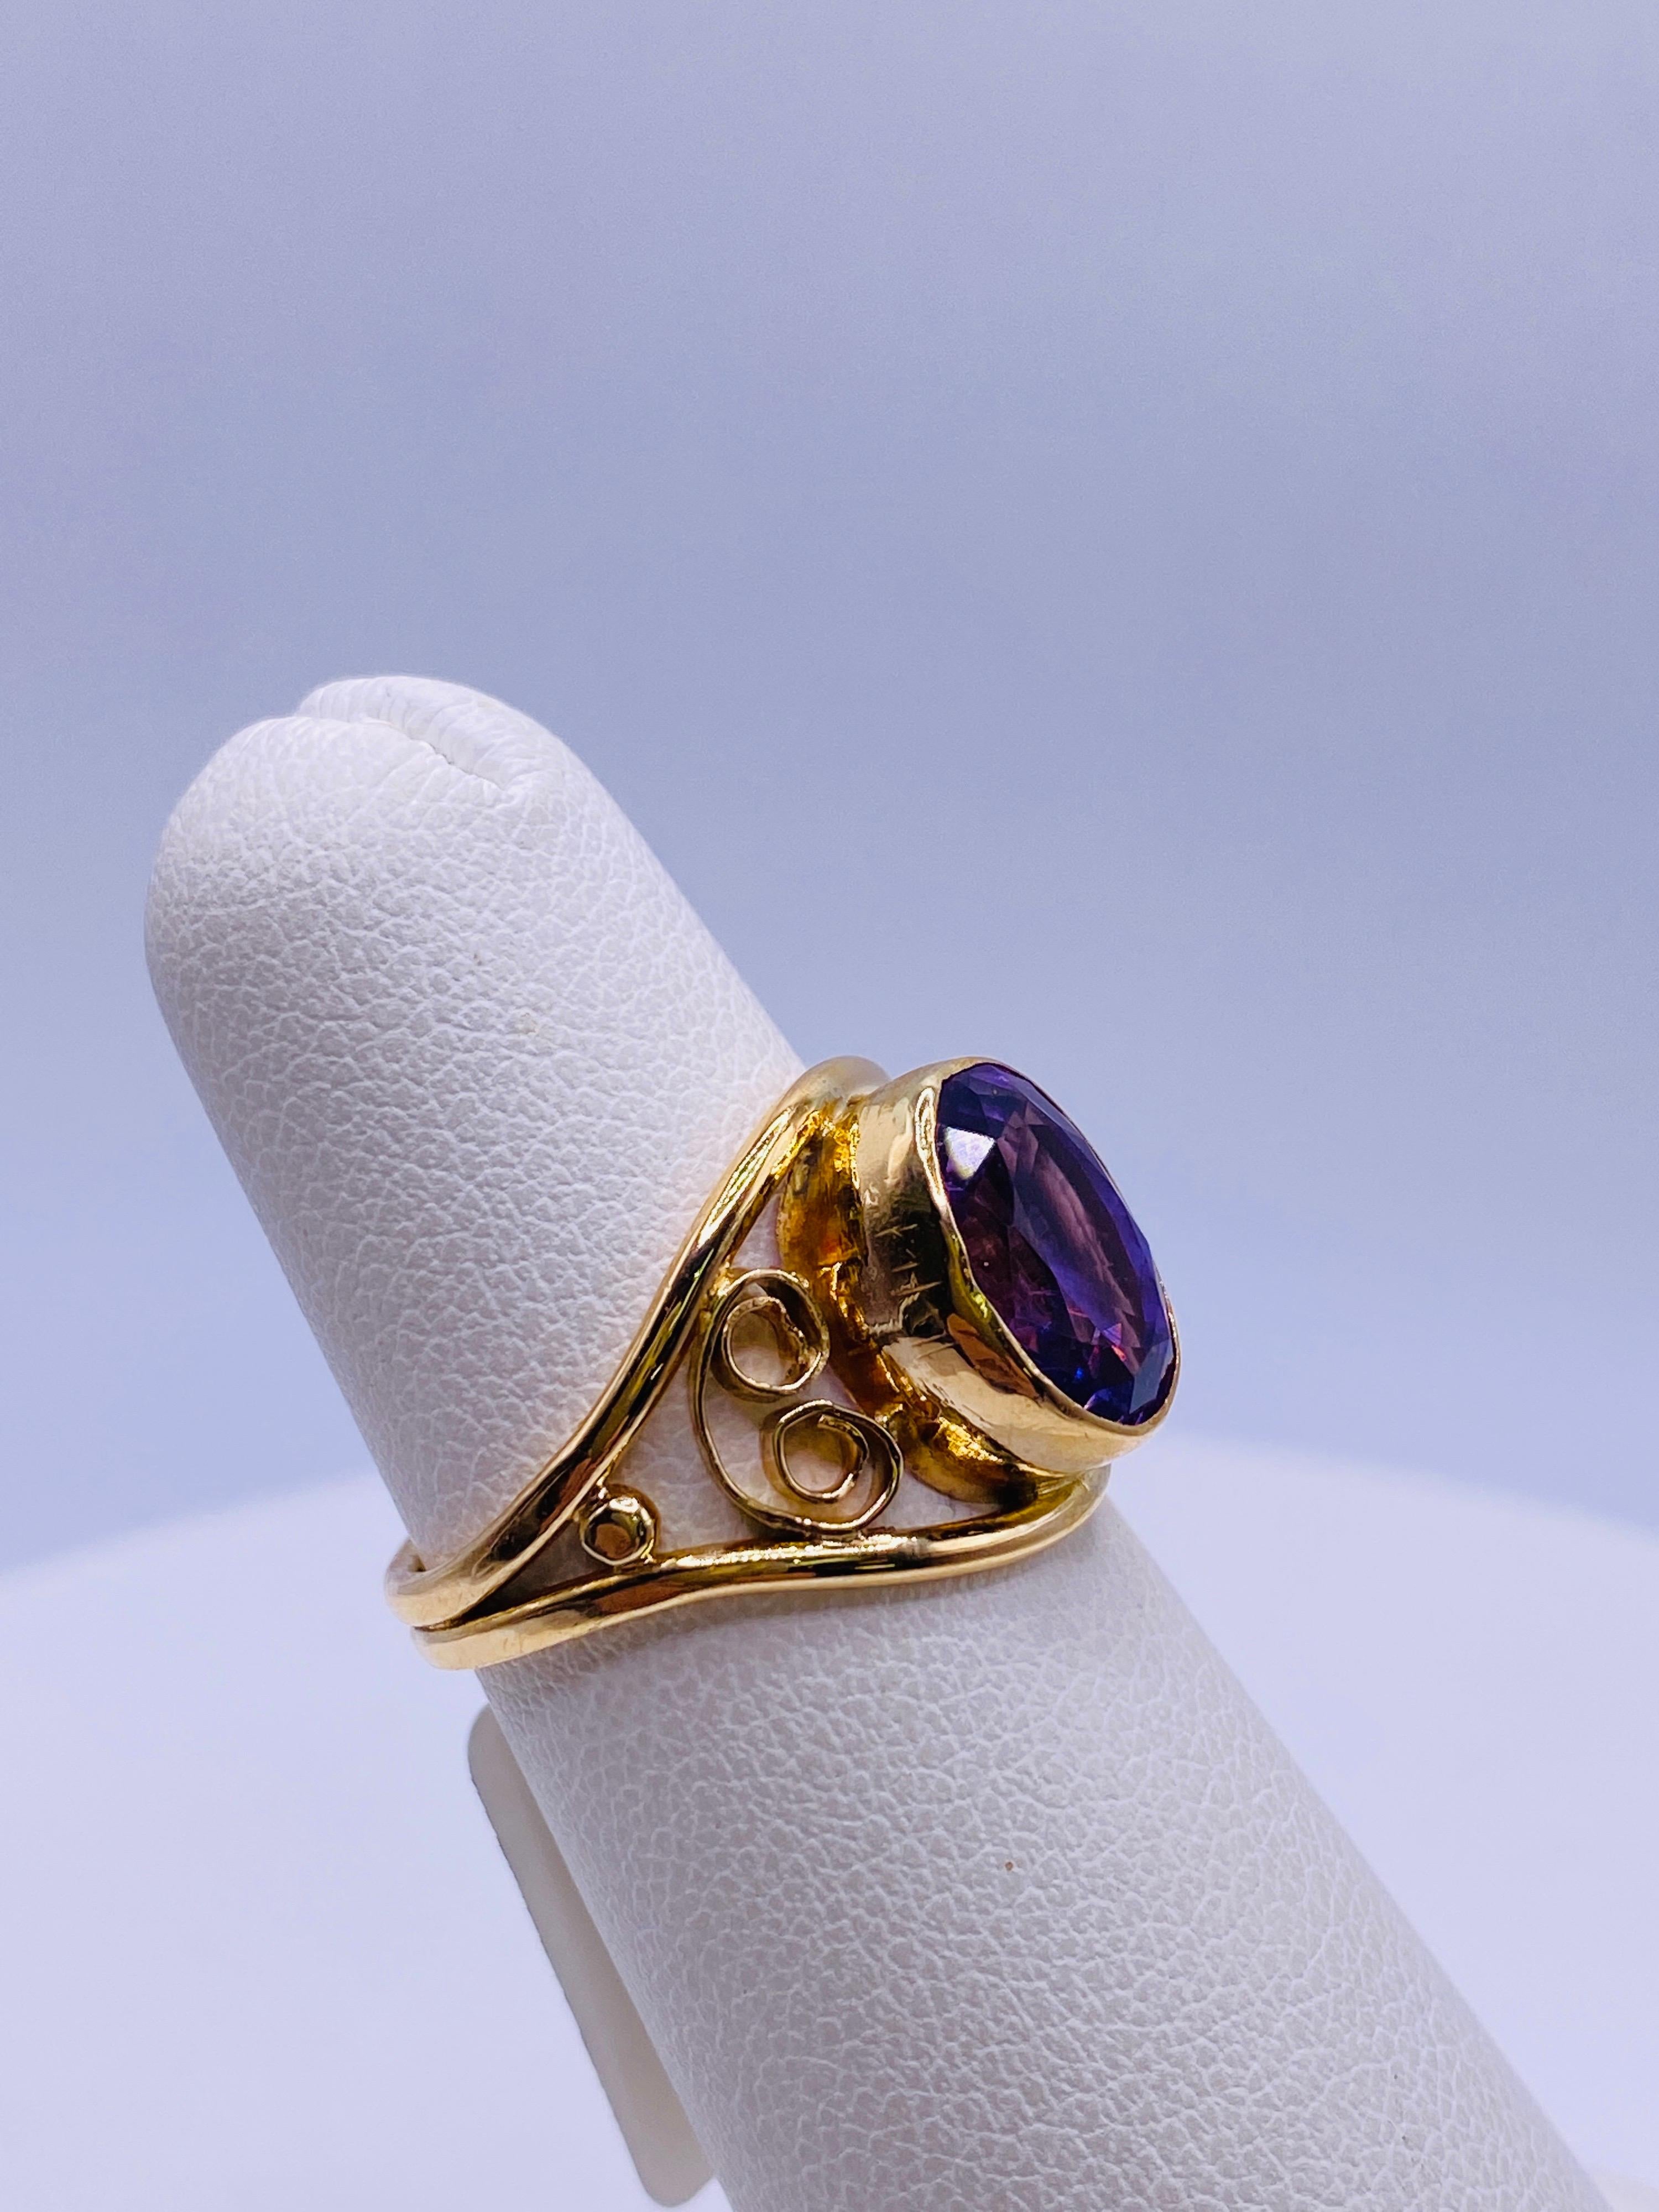 Vintage 10K yellow gold oval cut bezel set amethyst ring with simple scroll filigree design. 1.7dwt. Size 5.5